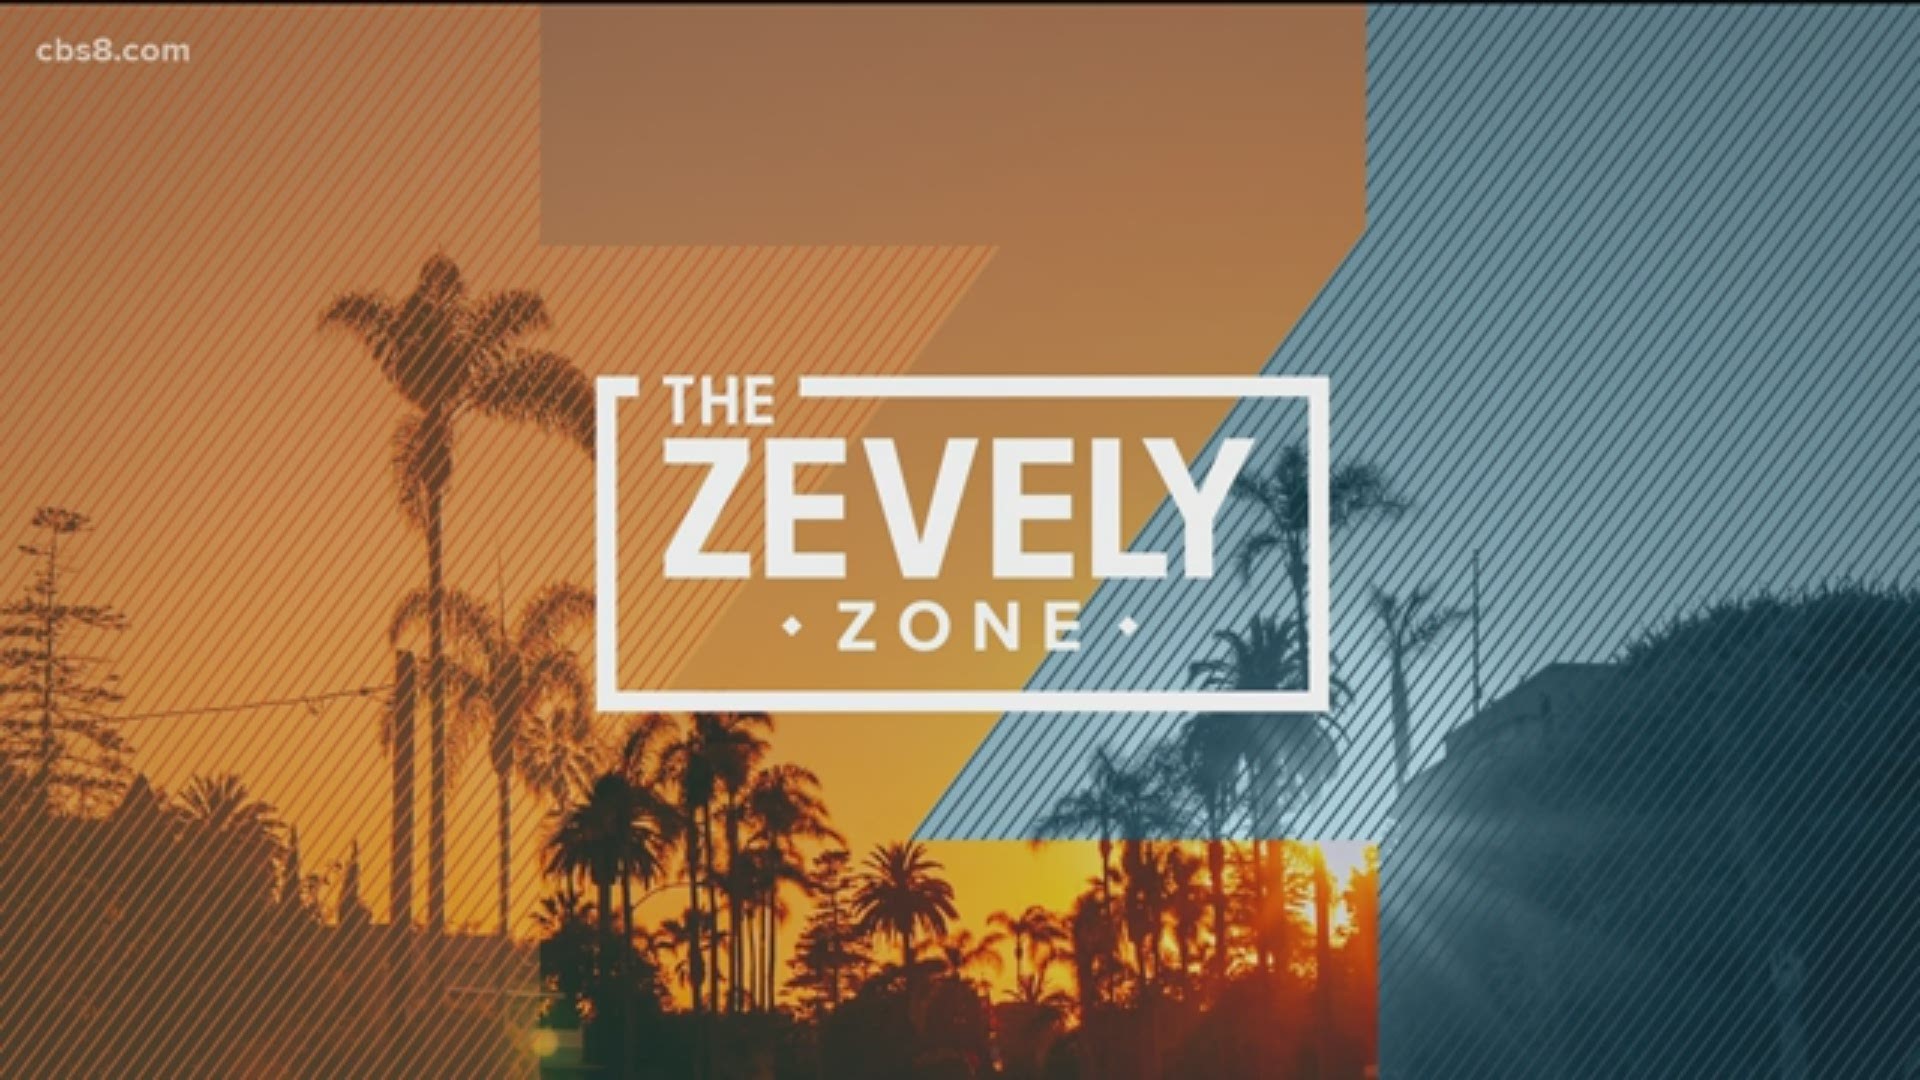 In Wednesday's Zevely Zone, Jeff went to Swami's Cafe near Point Loma to meet Debbie Hall and her family members.